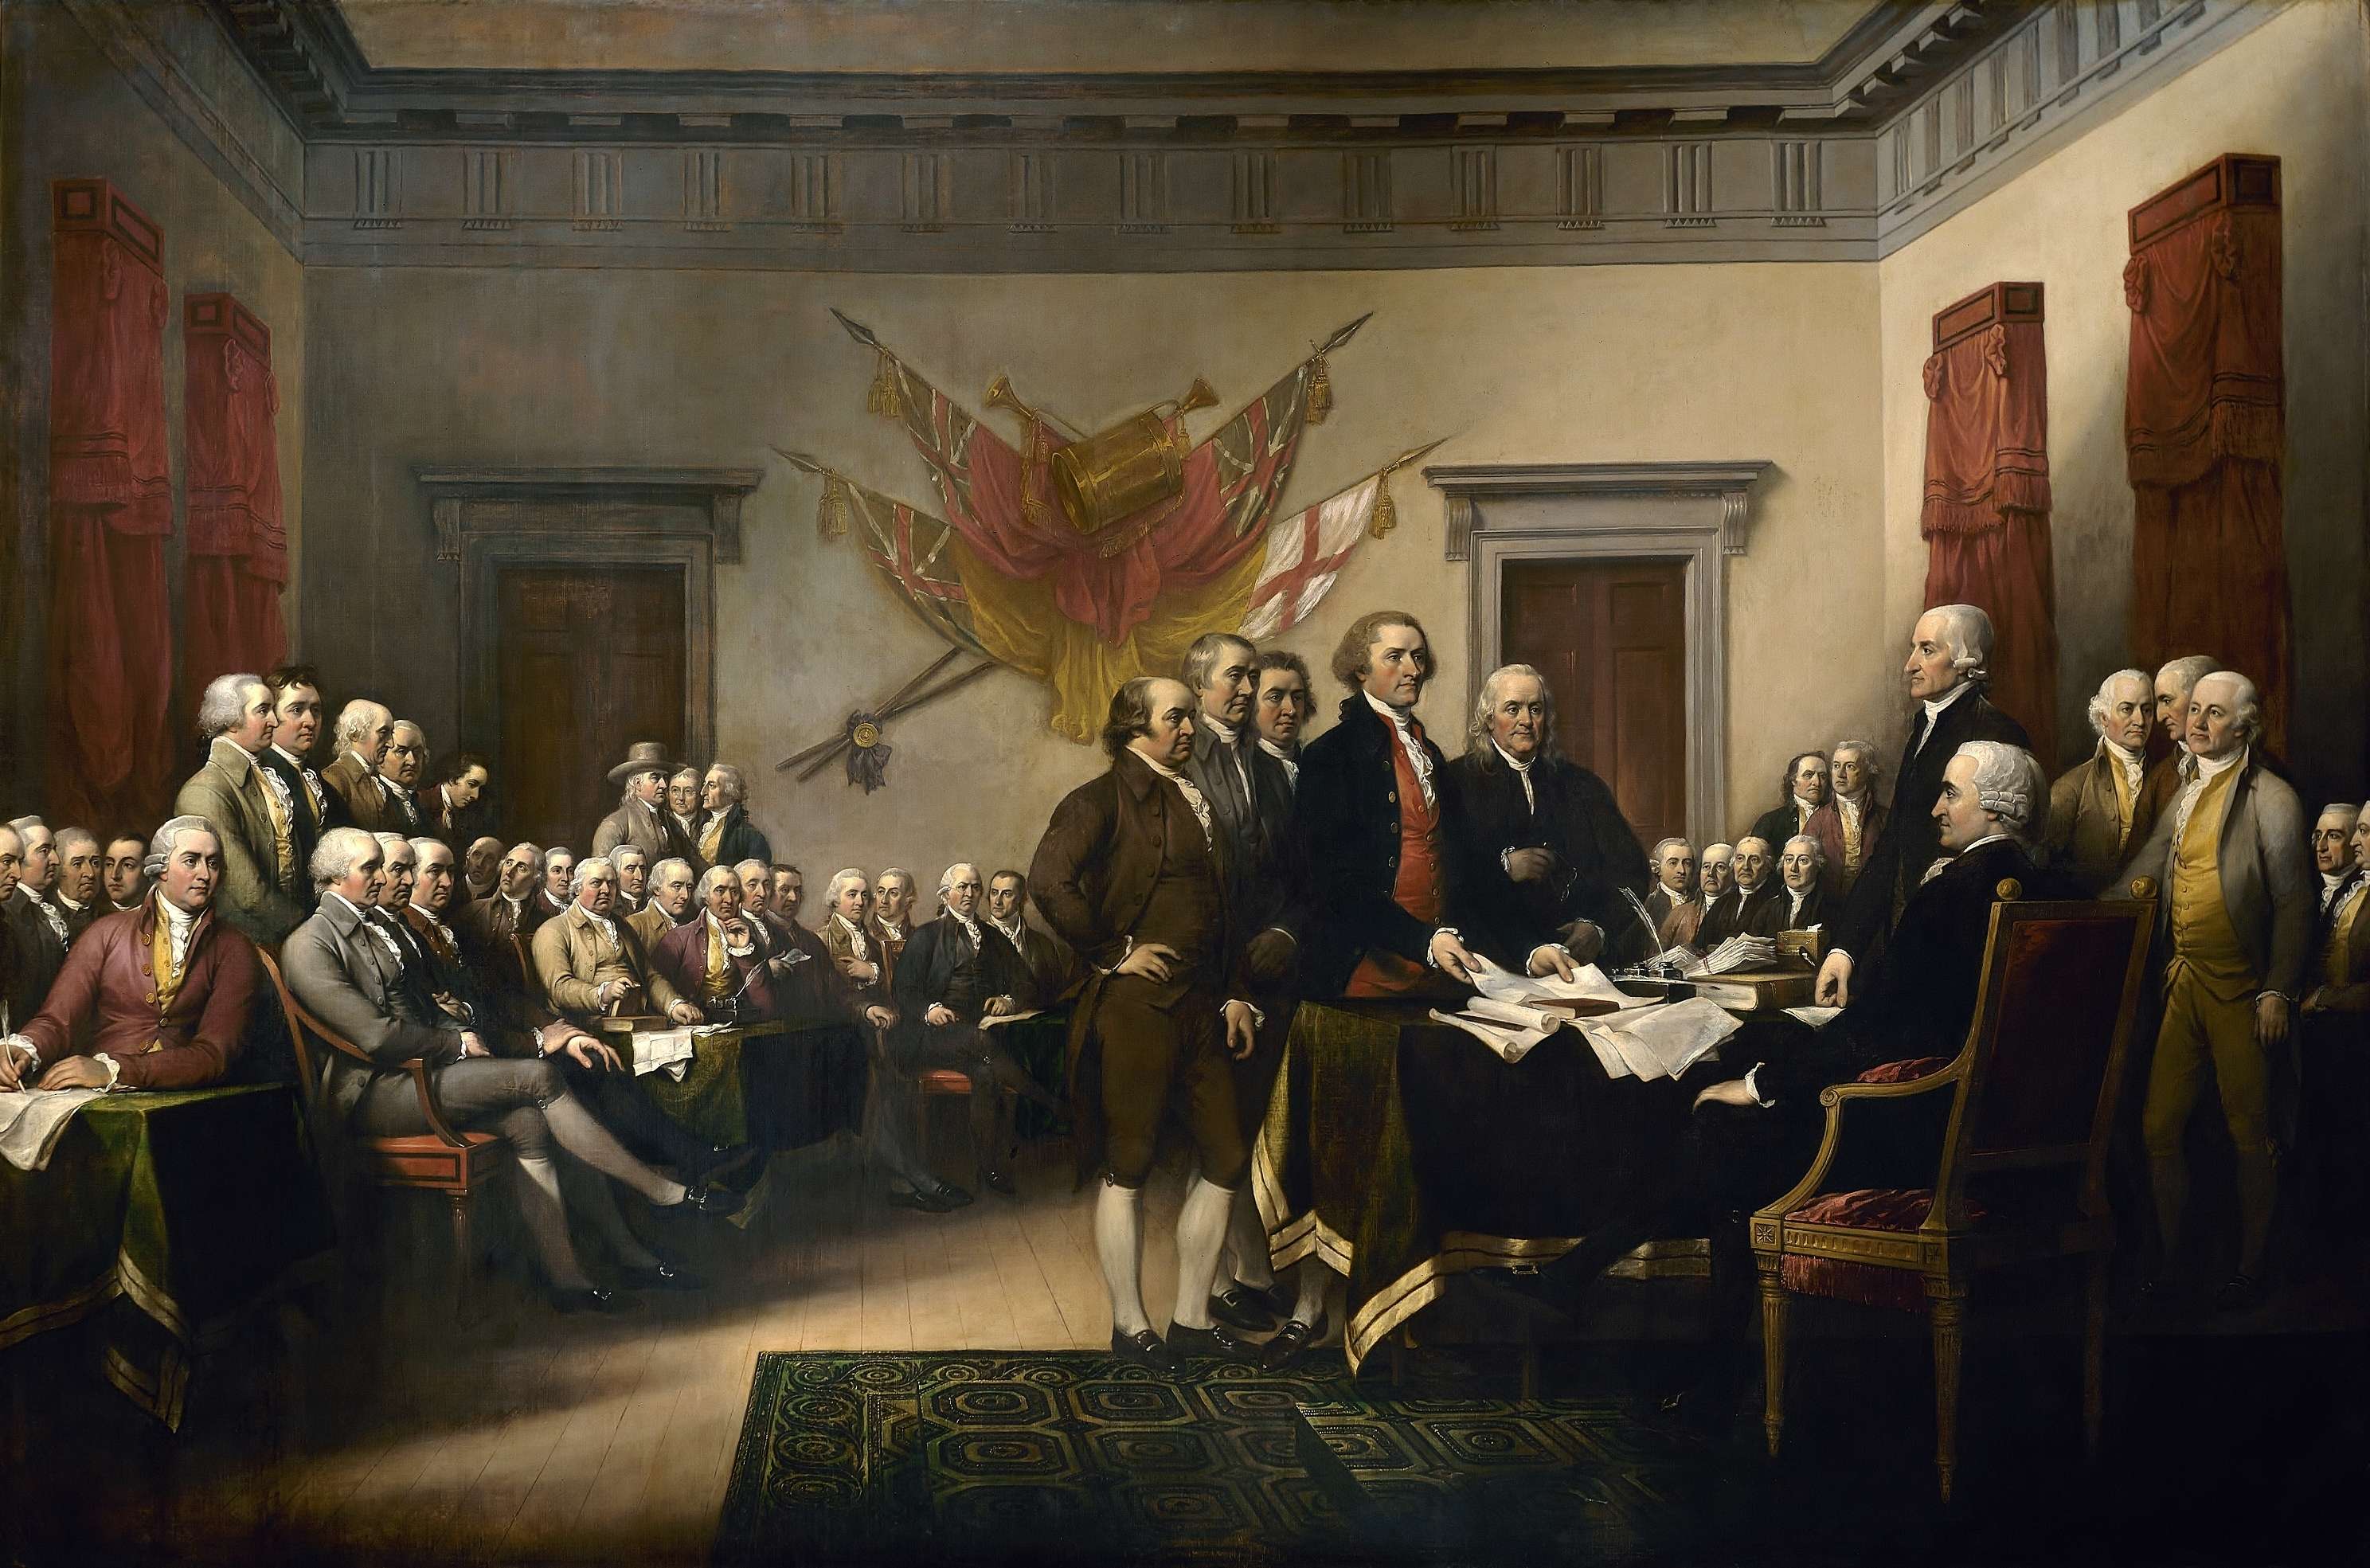 "Declaration of Independence" by John Trumbull.